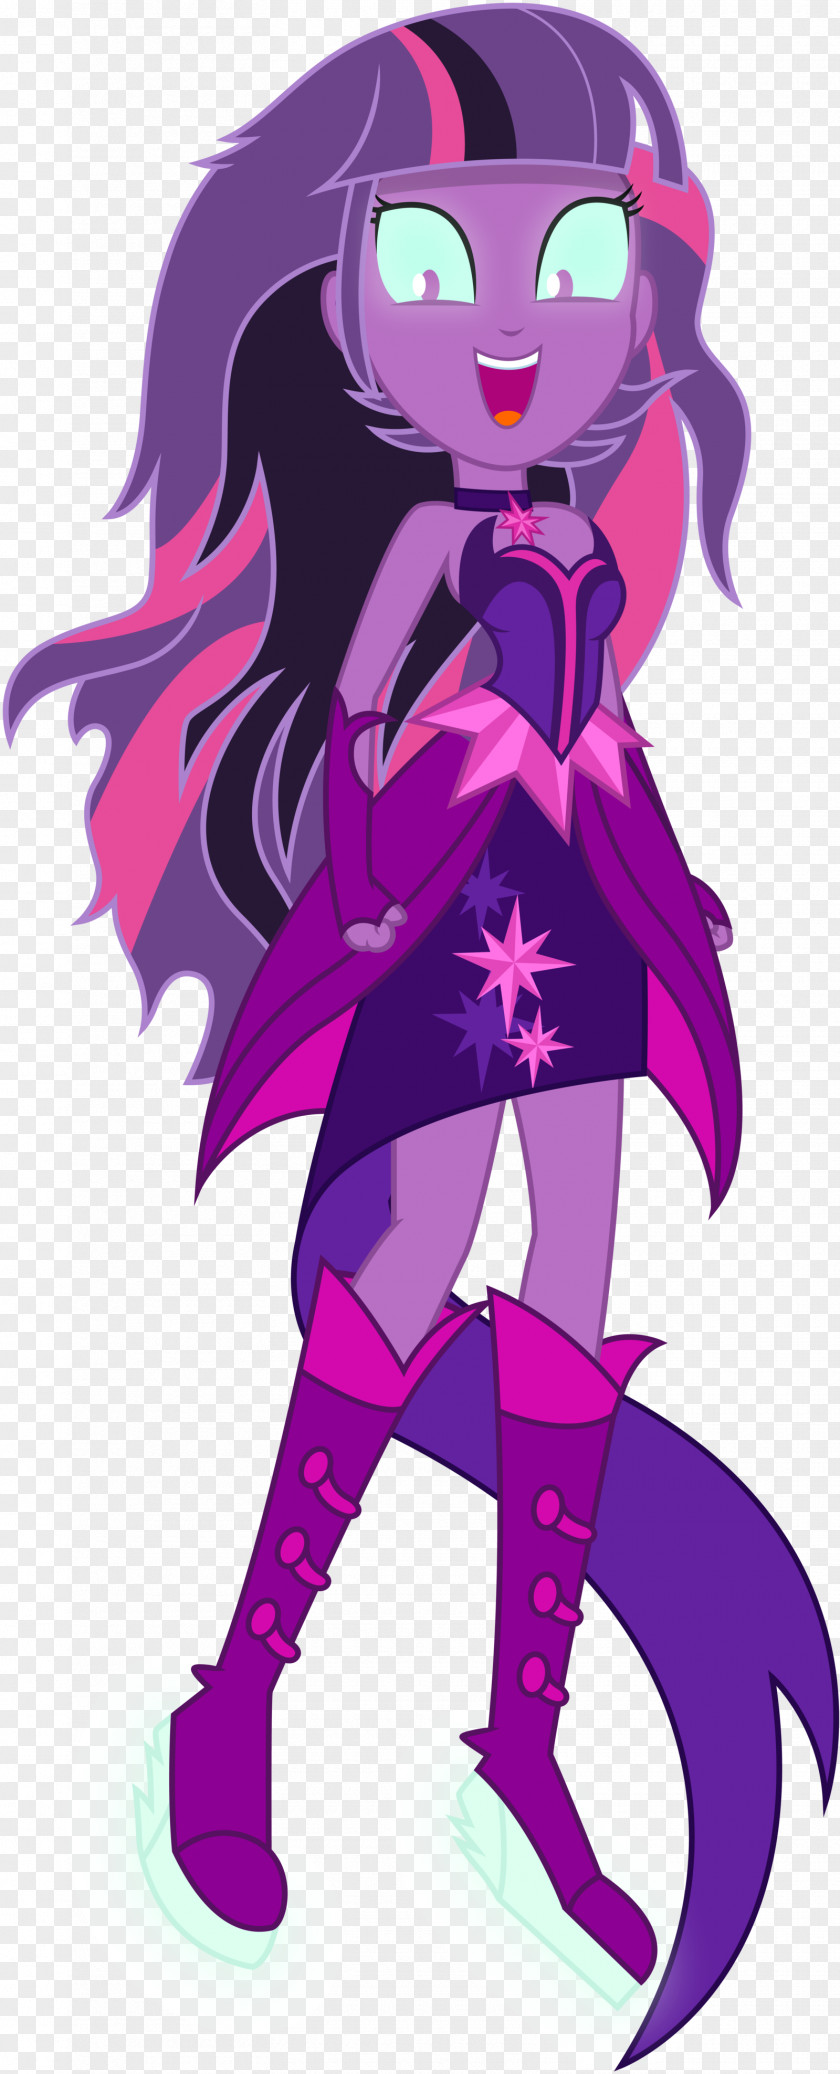 Hair Style Vector Twilight Sparkle Derpy Hooves My Little Pony: Friendship Is Magic Equestria PNG